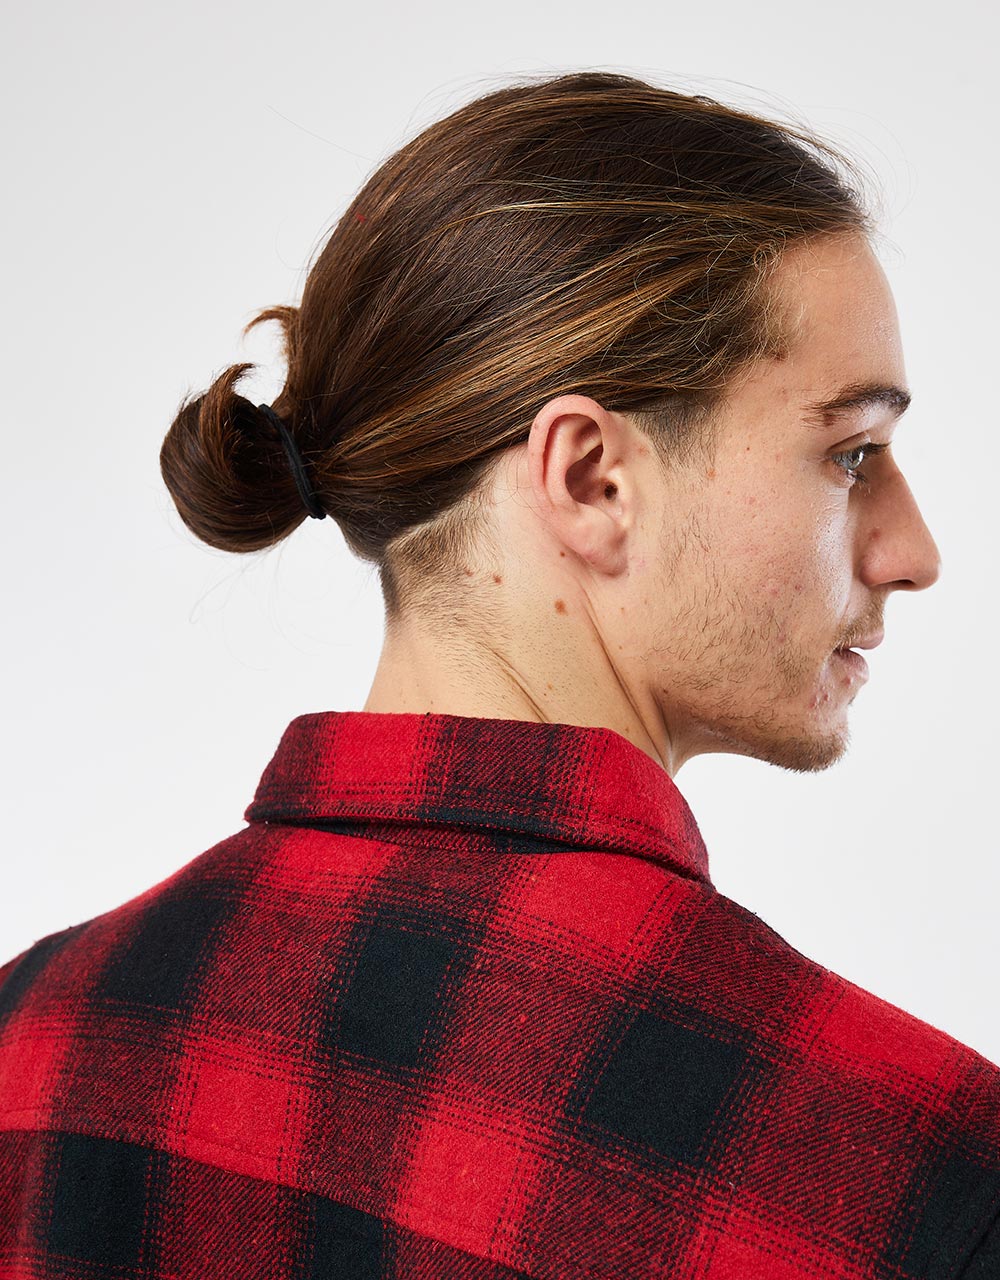 Etnies x Independent Flannel Shirt - Red